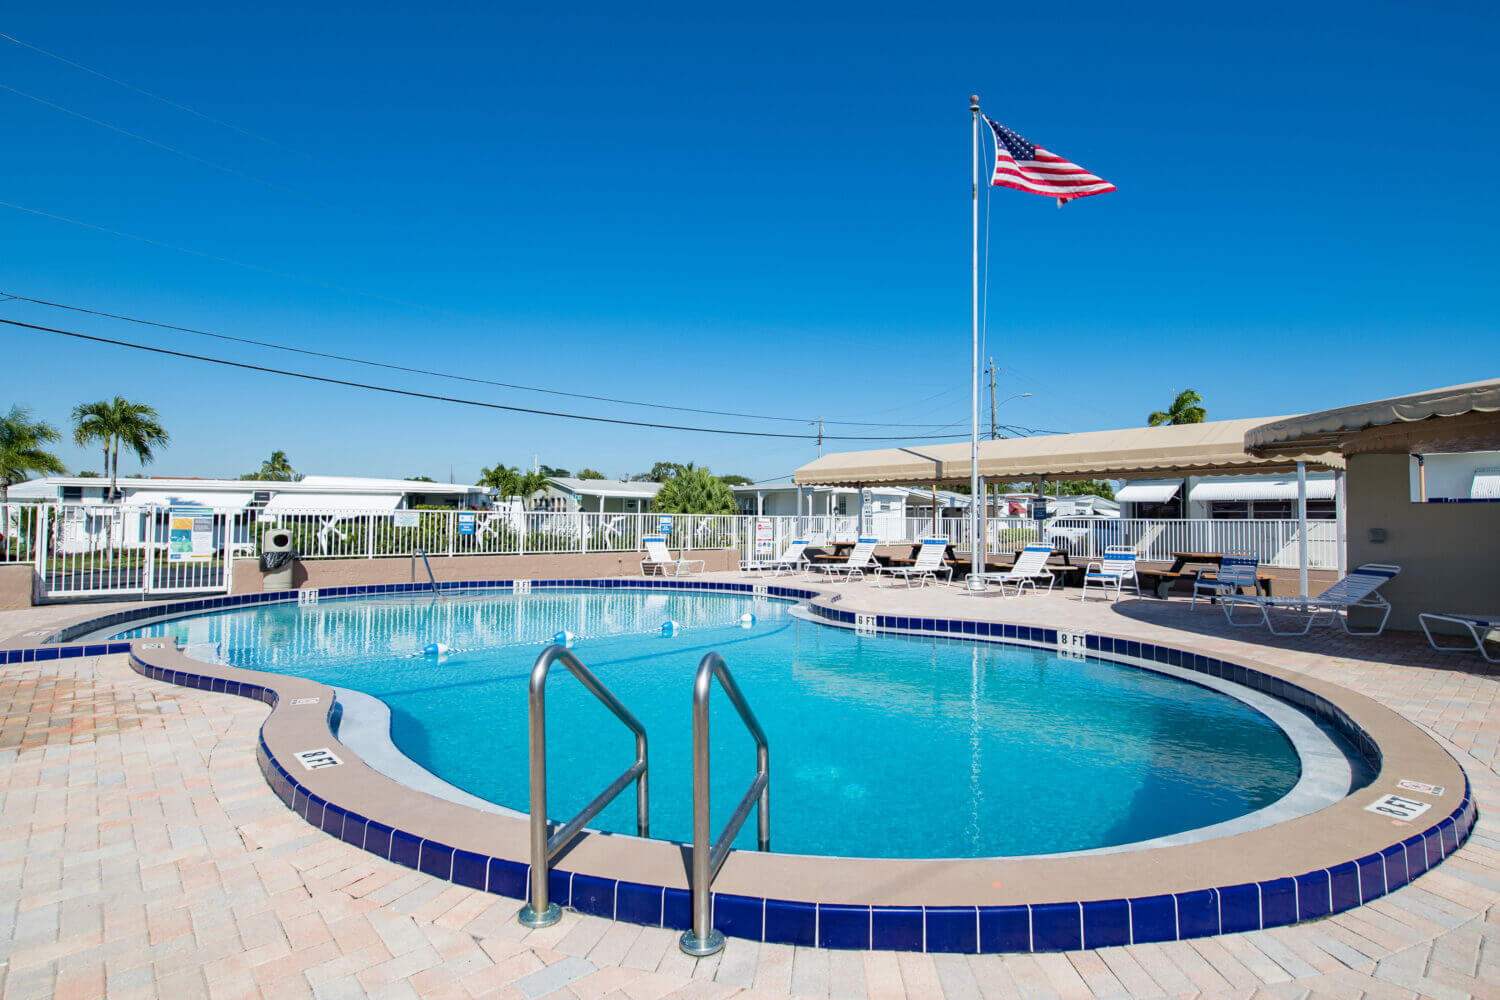 Swimming pool in a fenced area with sunbeds under clear skies and the American flag on a pole in the background.